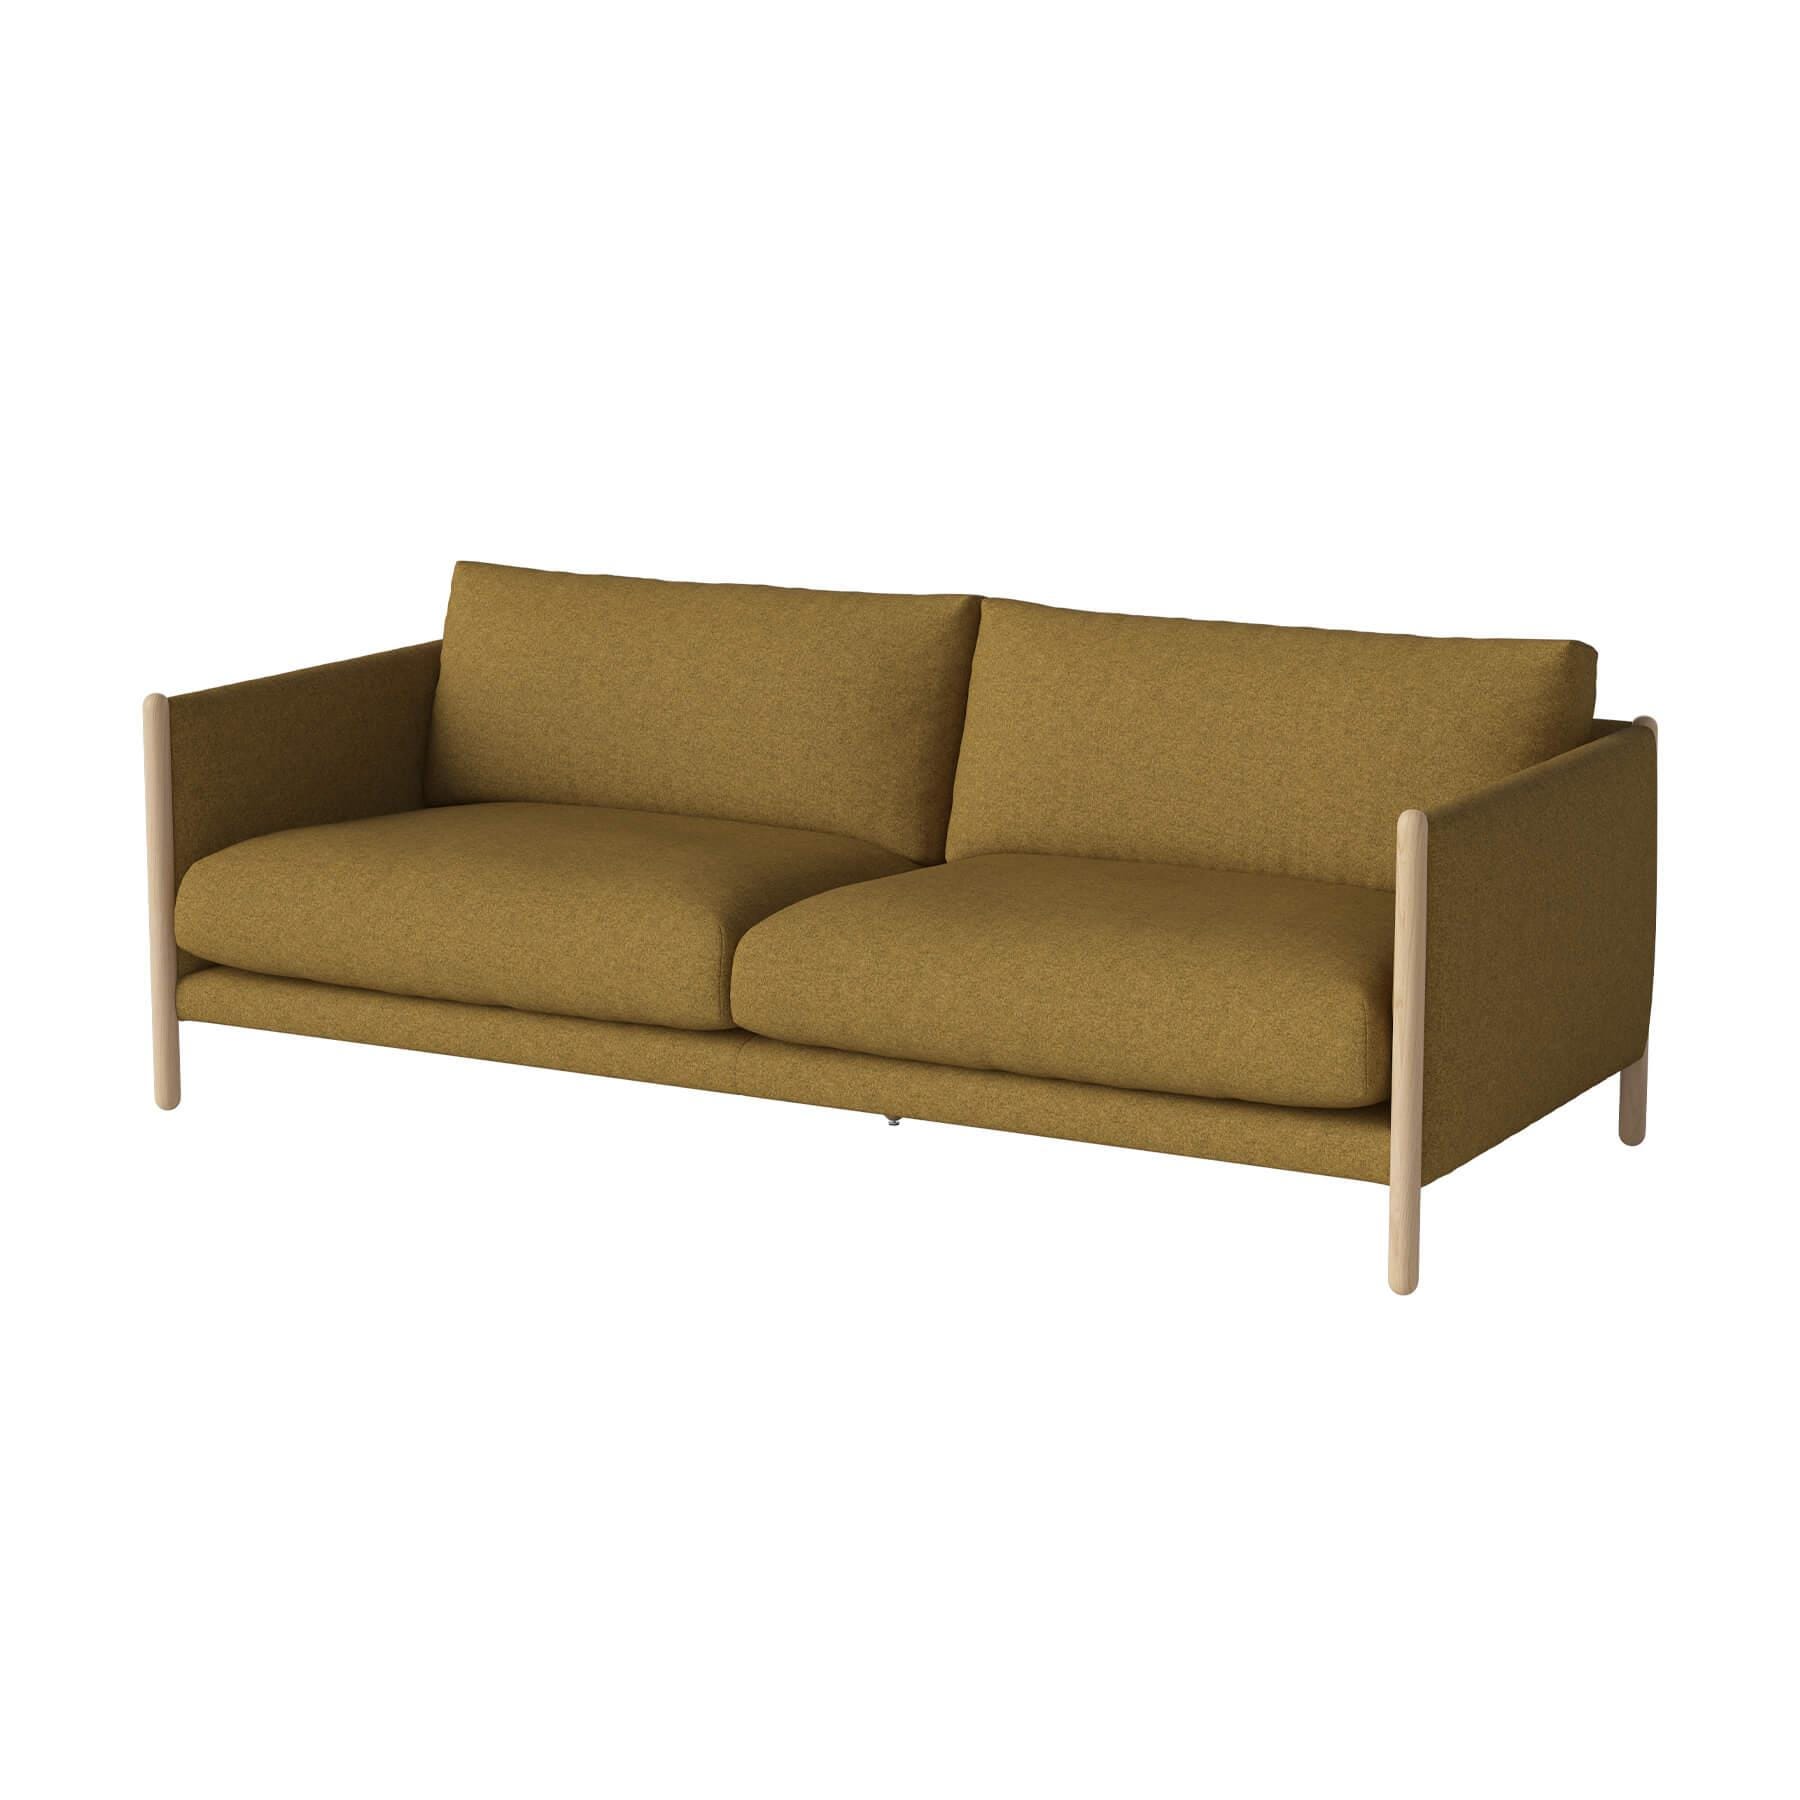 Bolia Hayden Sofa 25 Seater Sofa White Oiled Oak Qual Curry Brown Designer Furniture From Holloways Of Ludlow